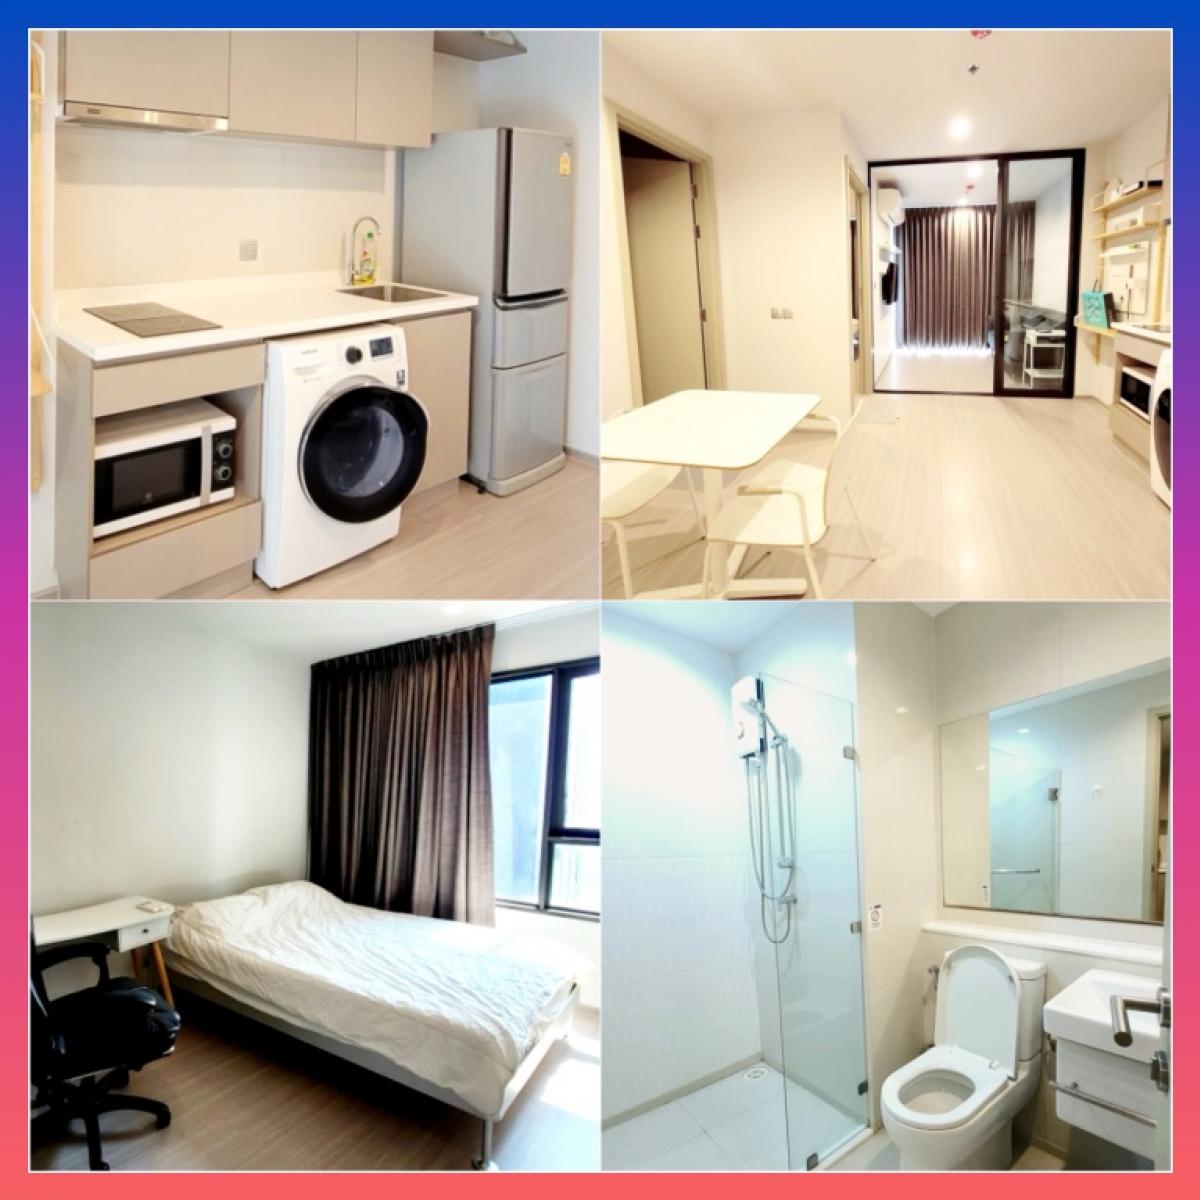 For RentCondoLadprao, Central Ladprao : Life Ladprao Condo for rent near BTS LadPrao Central Lotus Phahon Yothin Hor Wang School University Agriculture Chamber of Commerce.